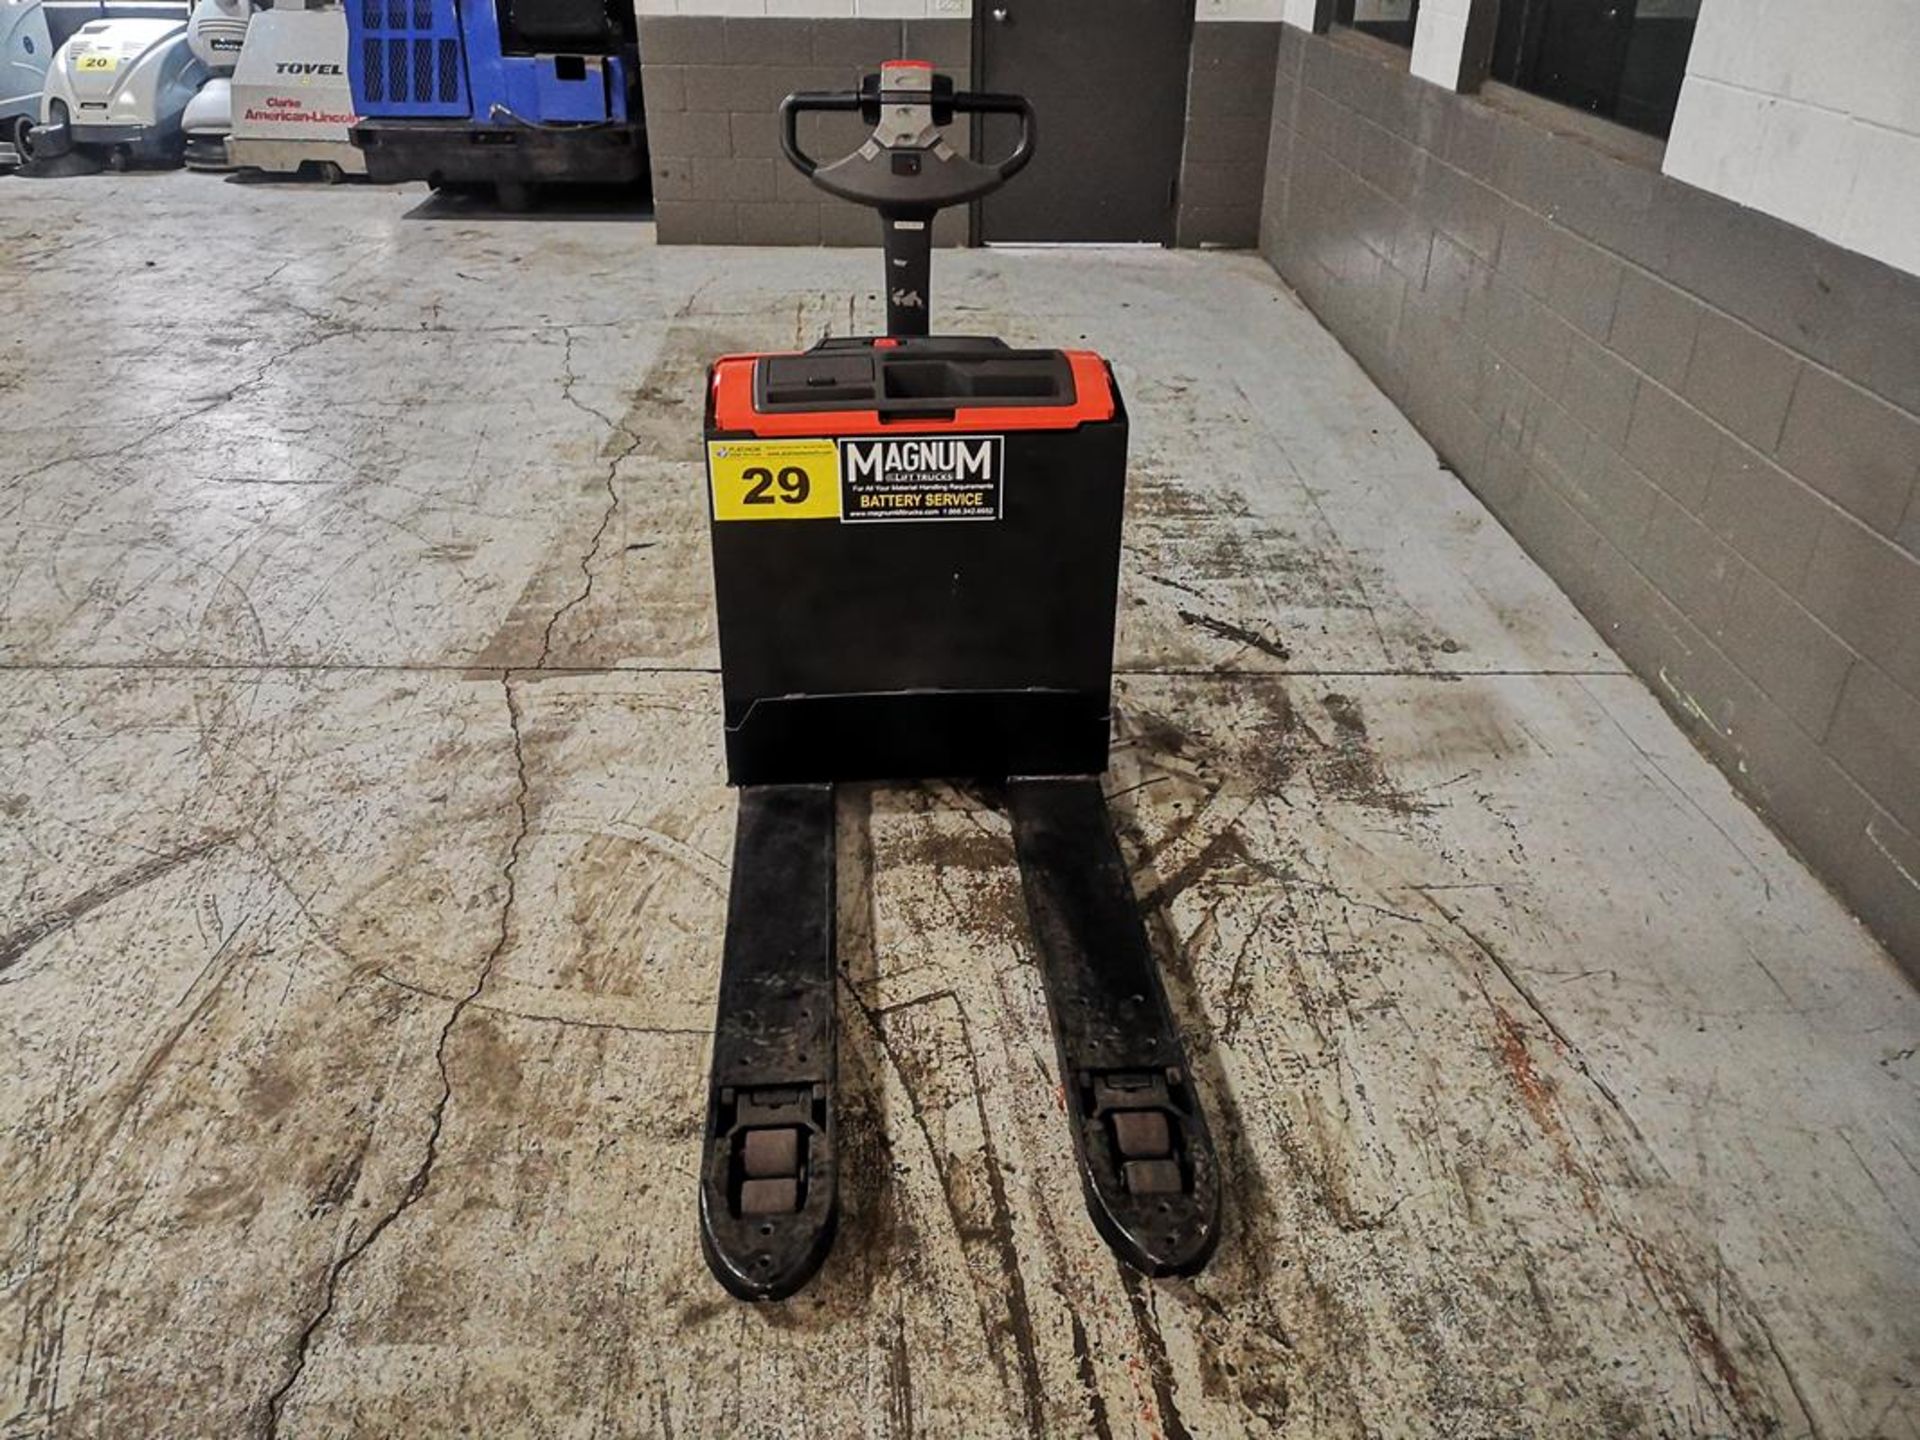 BT LEVIO PRODUCTS, LWE200, 4400 LBS, BATTERY POWERED PALLET TRUCK, SOLID CUSHION TIRES, 27" W X - Image 3 of 10